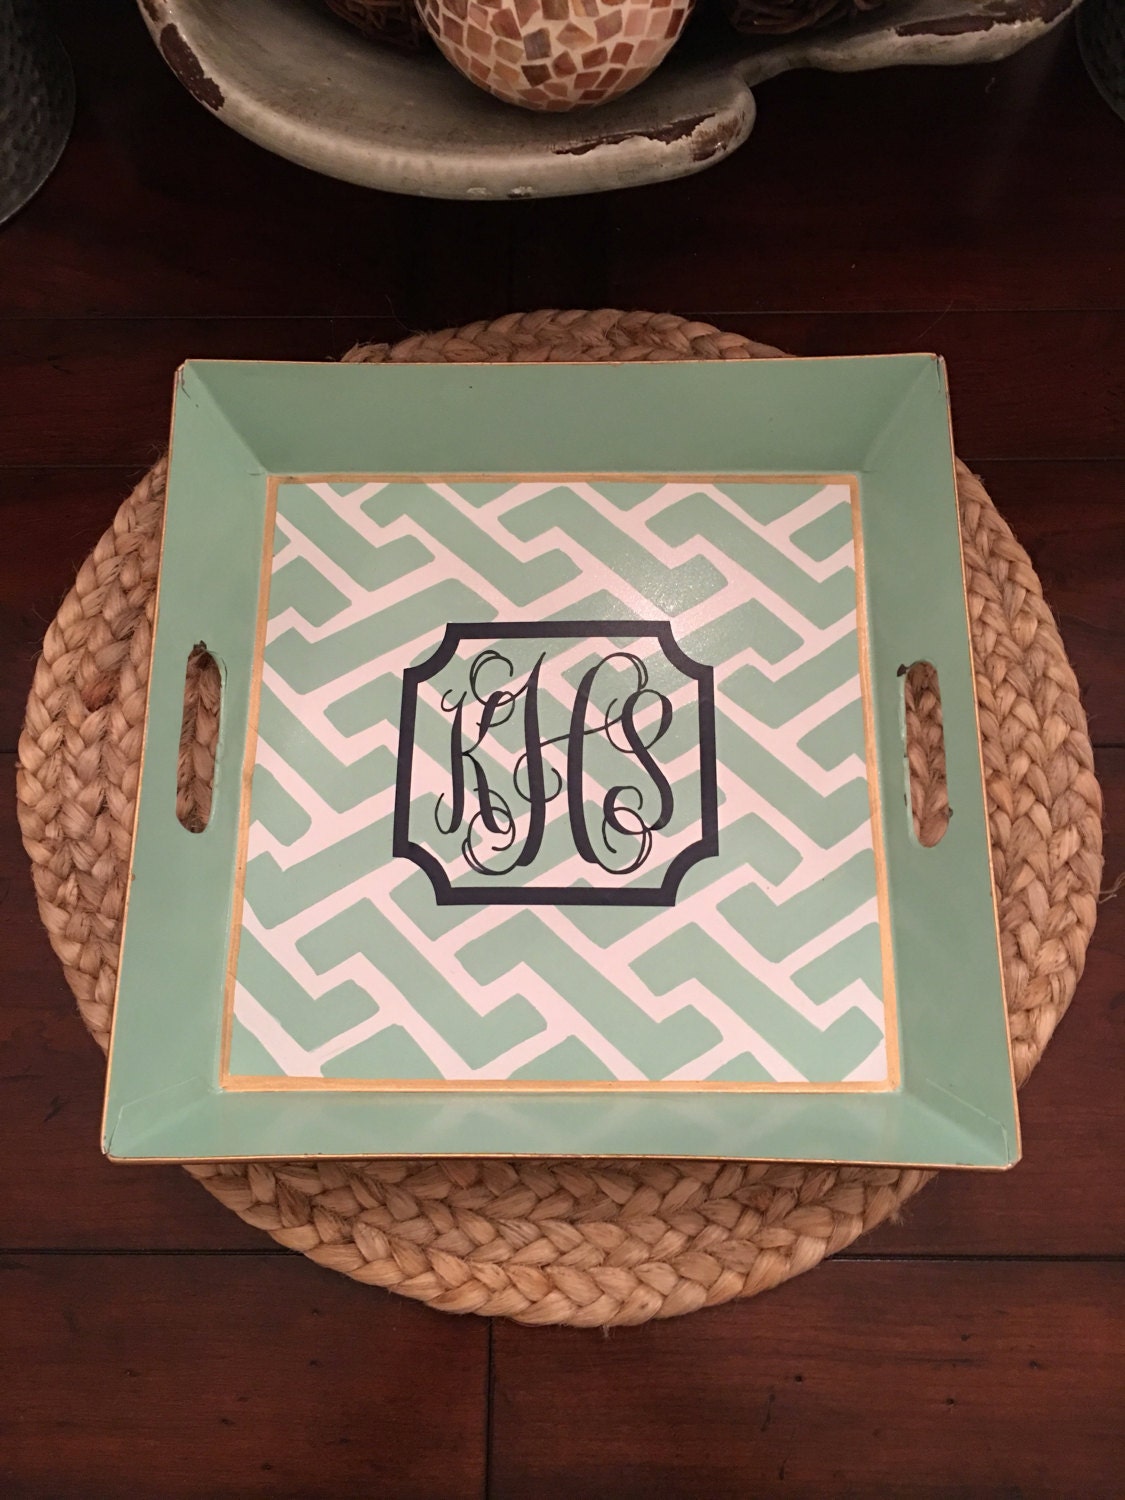 12 x 12 Teal and white decorative tin tray with navy monogram